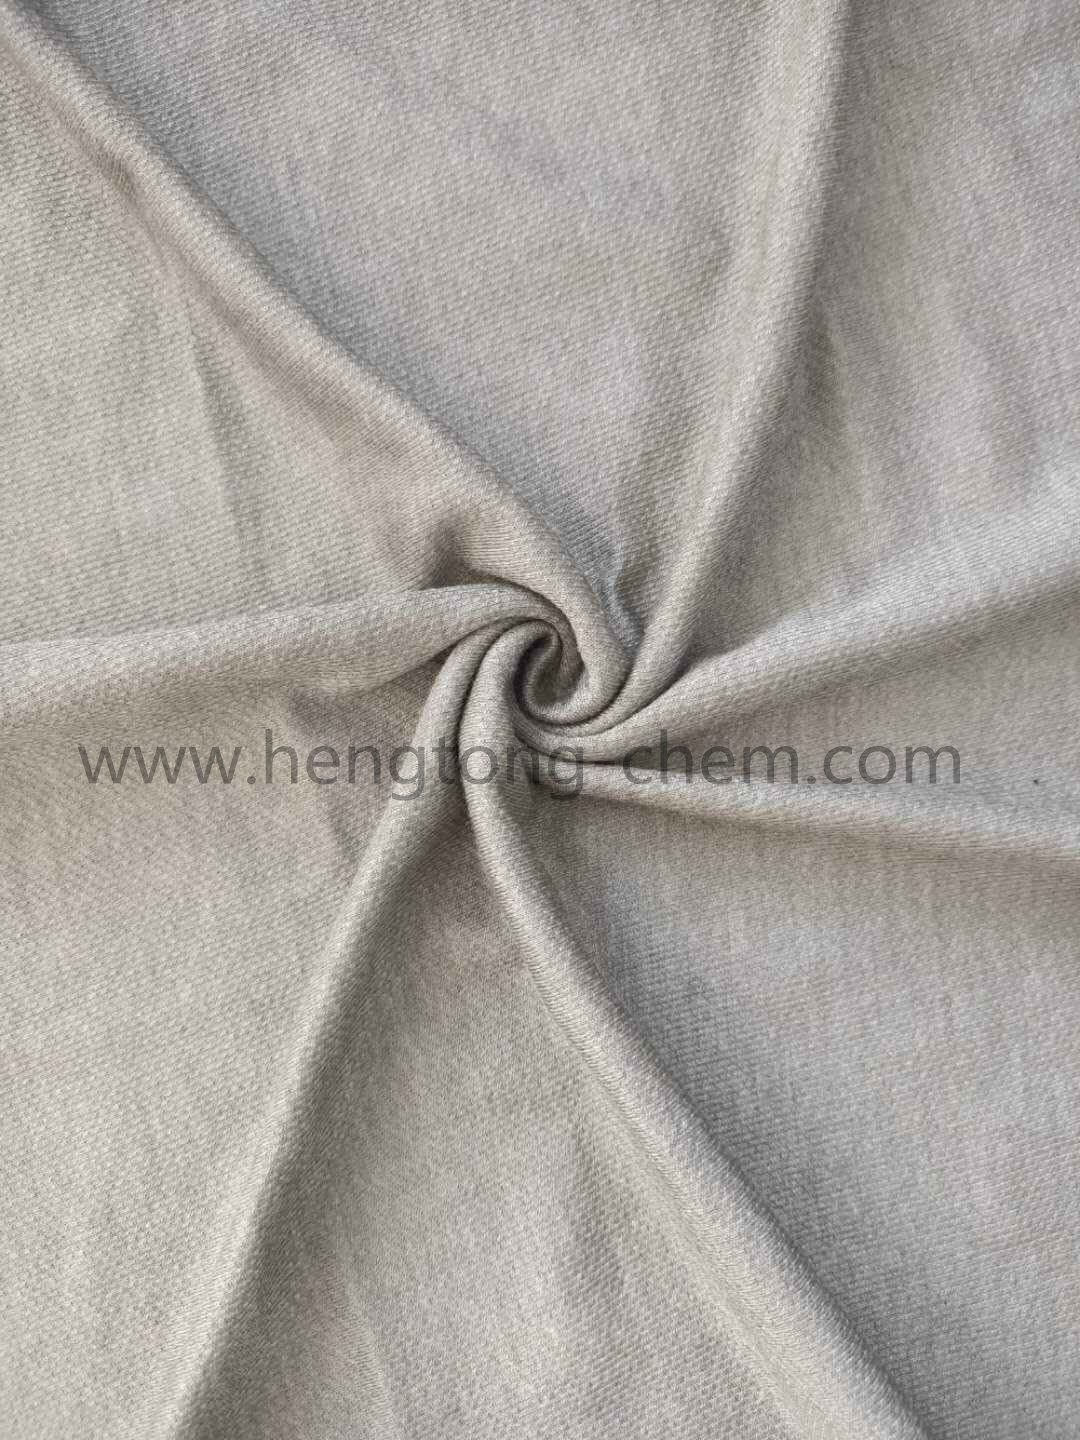 Silver fiber double knitted fabric